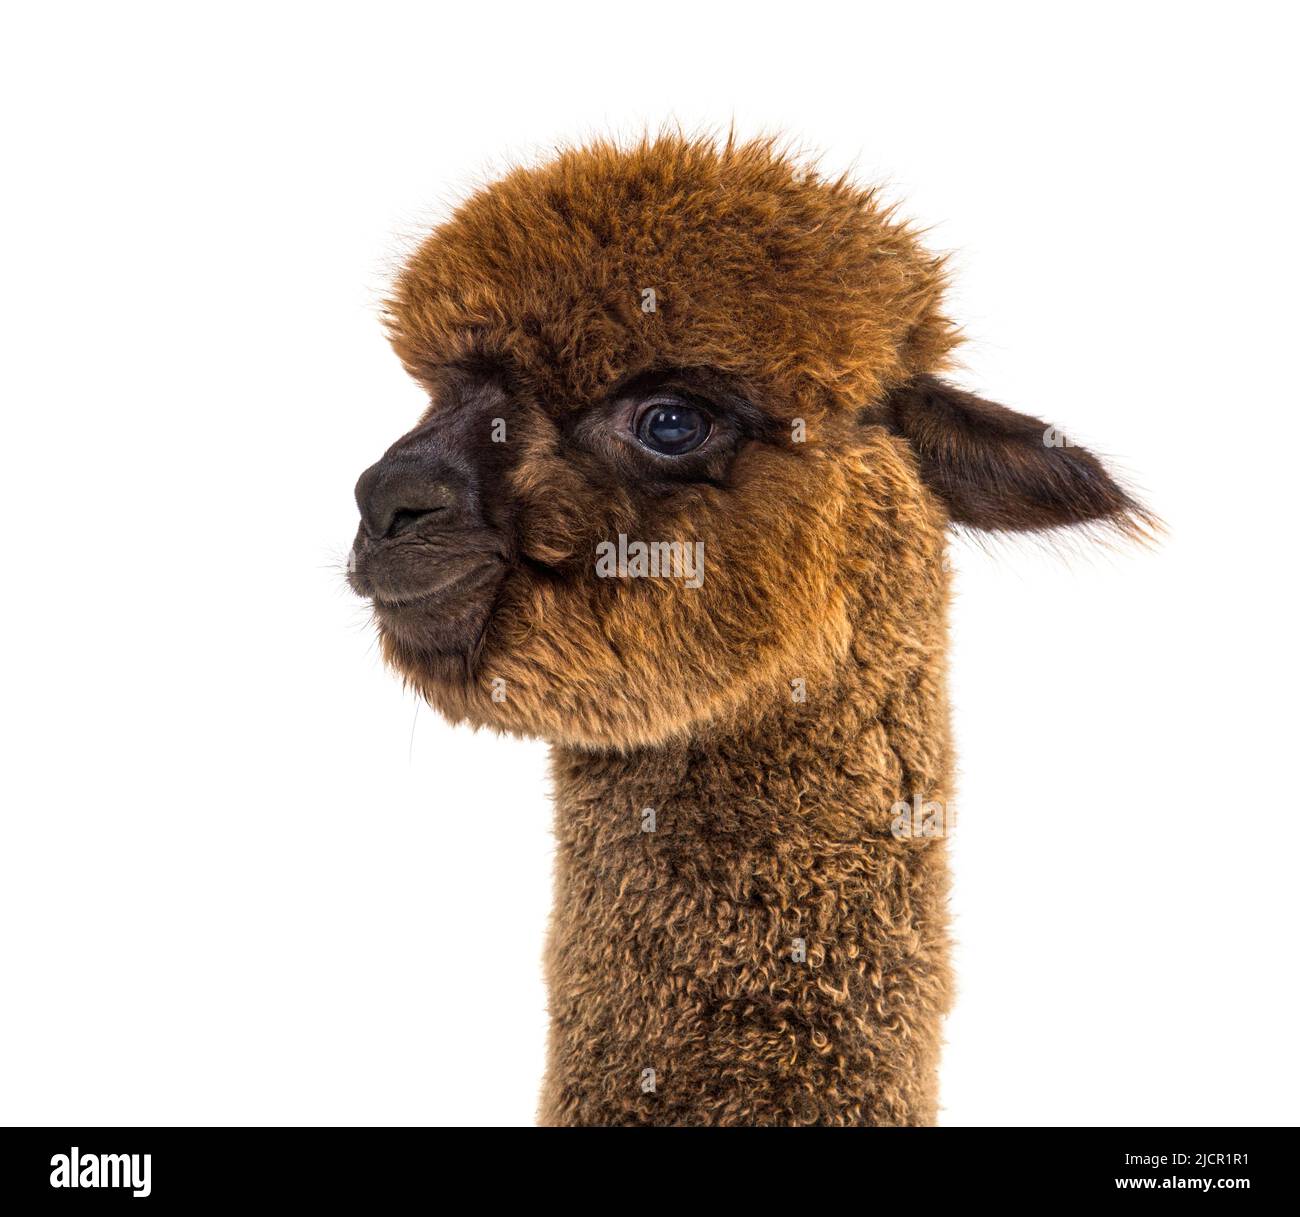 Dark brown young alpaca - Lama pacos, isoltaed on white Stock Photo